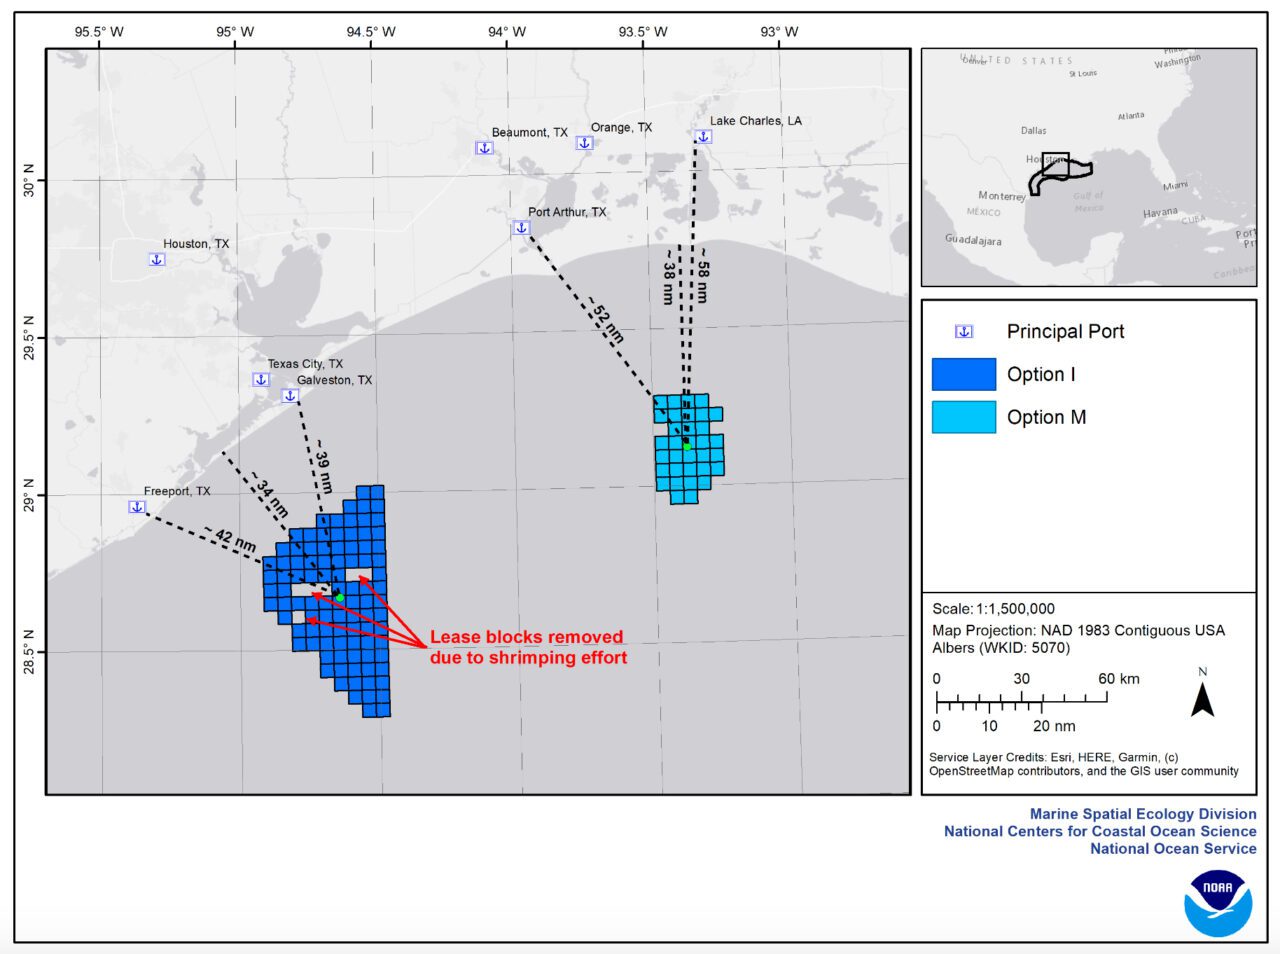 BOEM’s First Two Offshore Wind Areas in the Gulf of Mexico Could Feed Texas, Louisiana